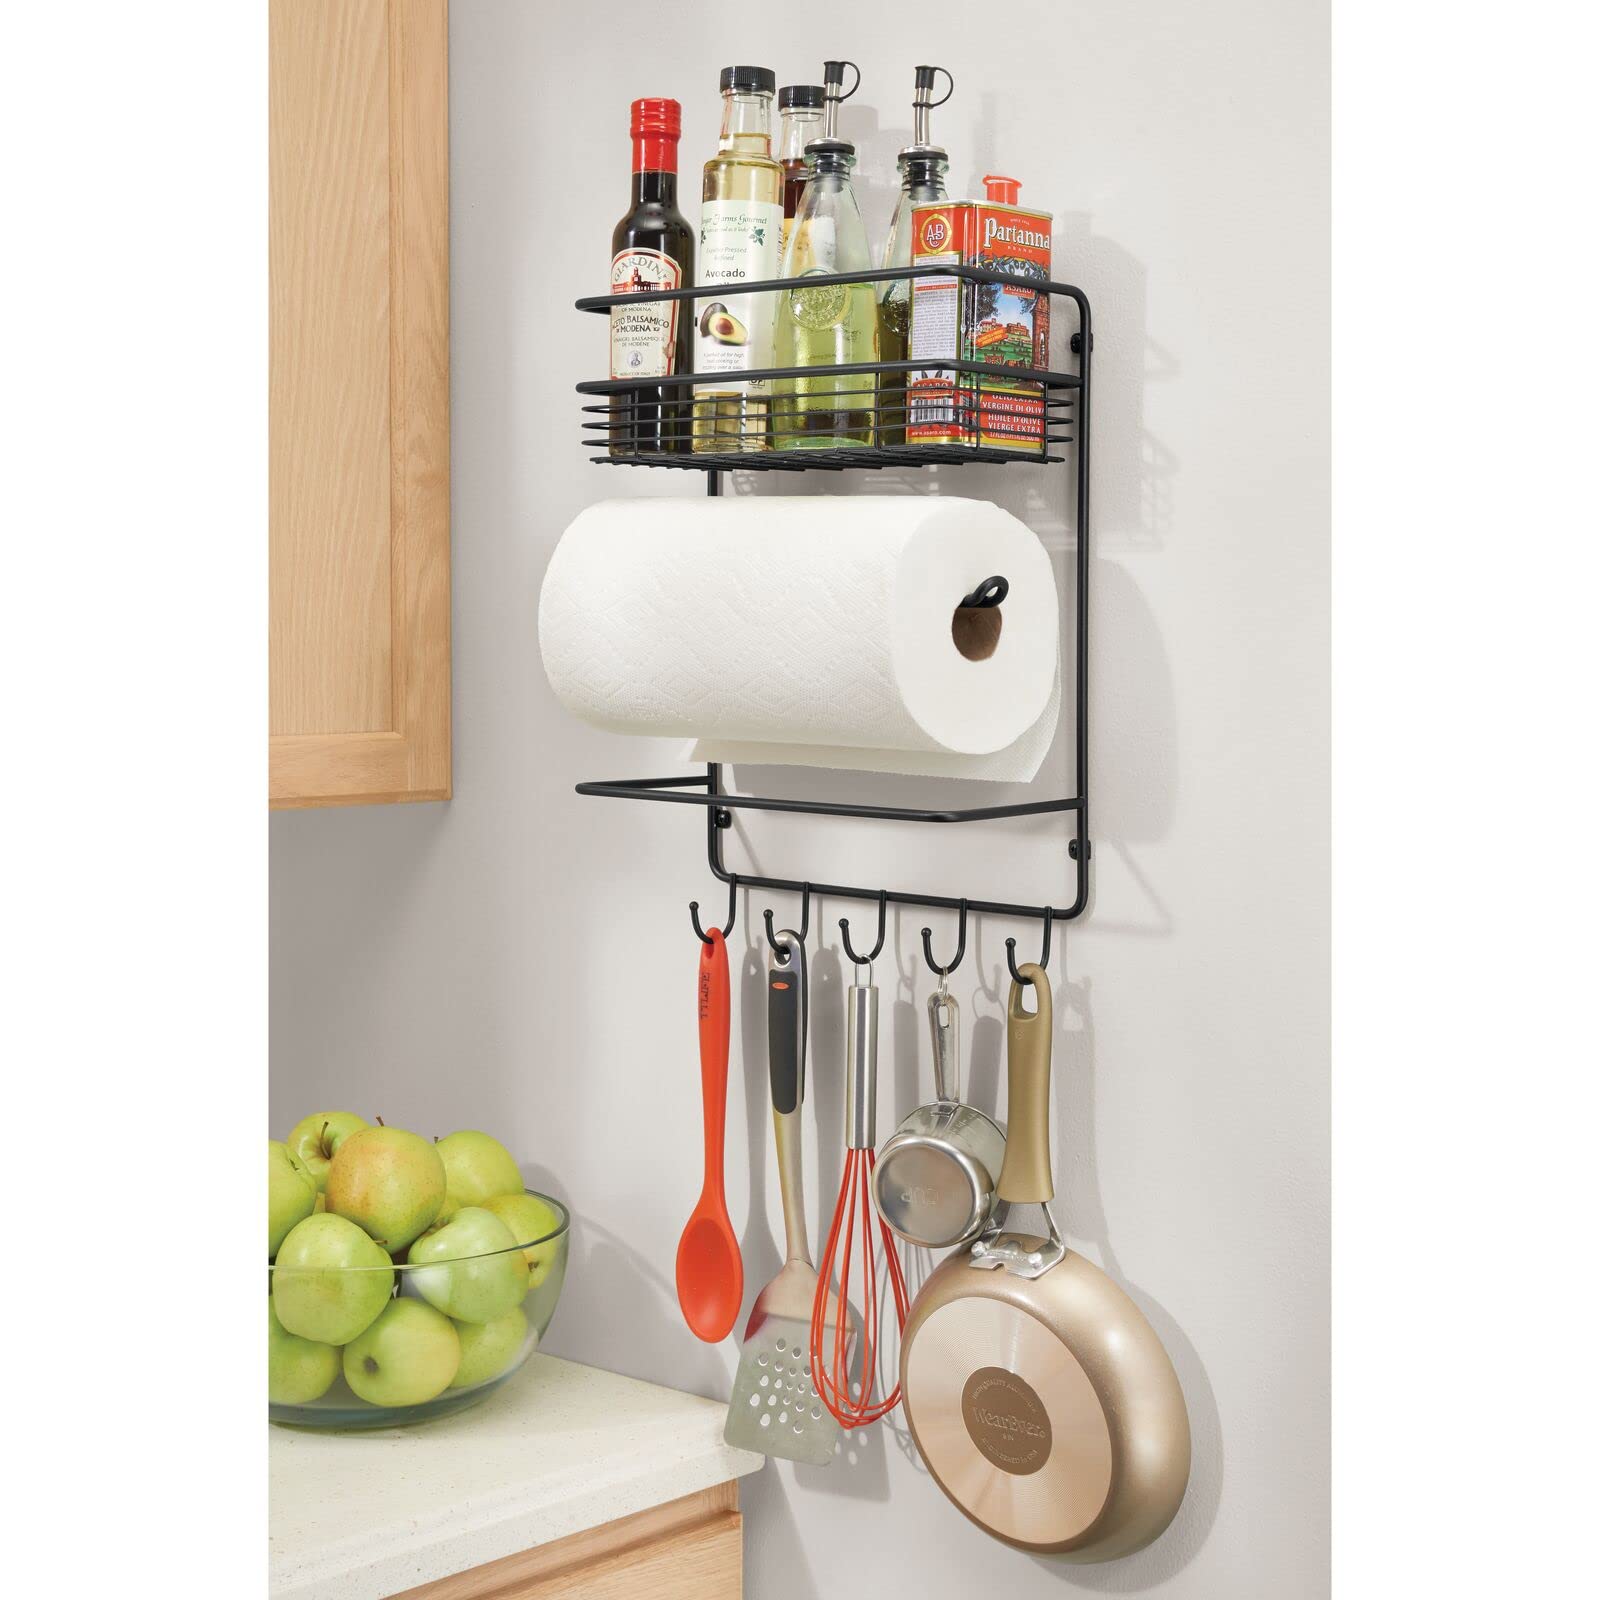 mDesign Metal Wall Mount Paper Towel Holder with Storage Shelf and Hooks for Kitchen, Pantry, Laundry, Garage Organization - Holds Spices, Seasonings, Pot Holders, Cookware - Black